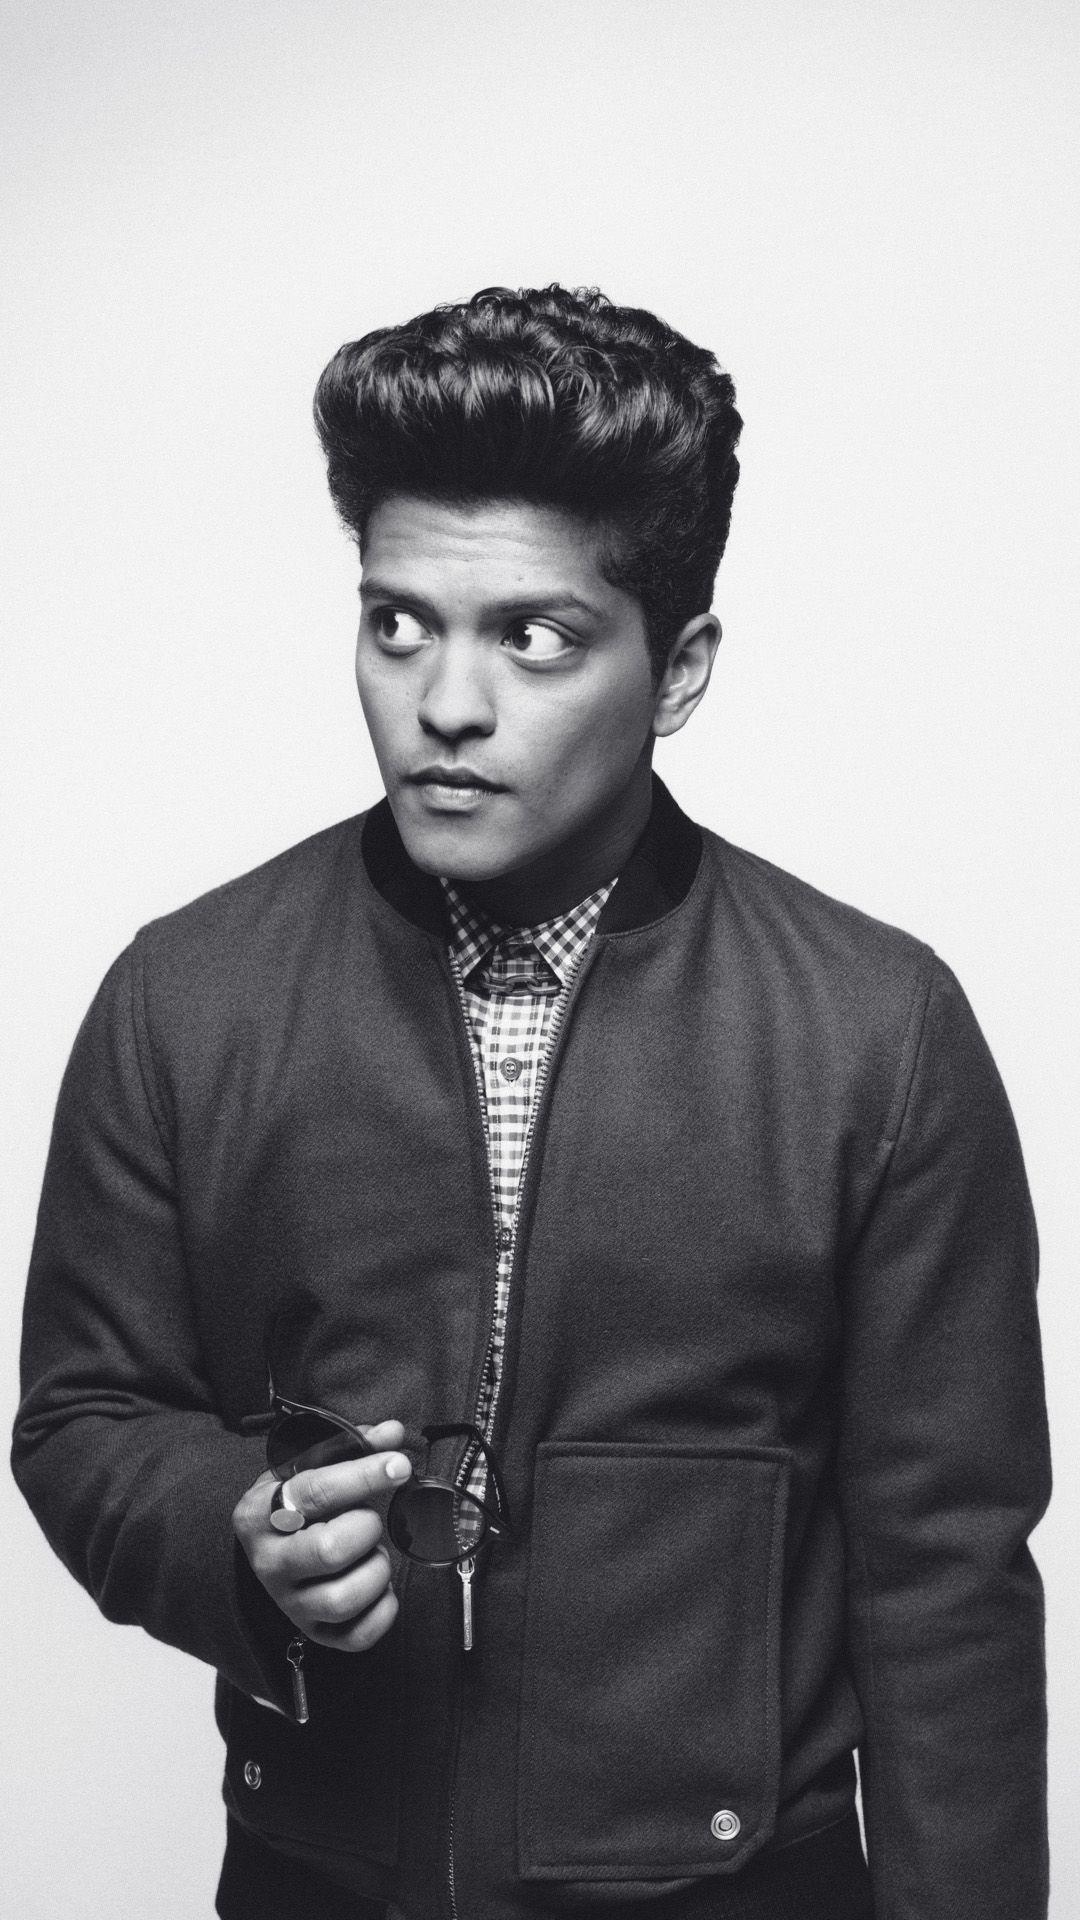 New Bruno Mars Wallpapers Top Free New Bruno Mars Backgrounds Wallpaperaccess